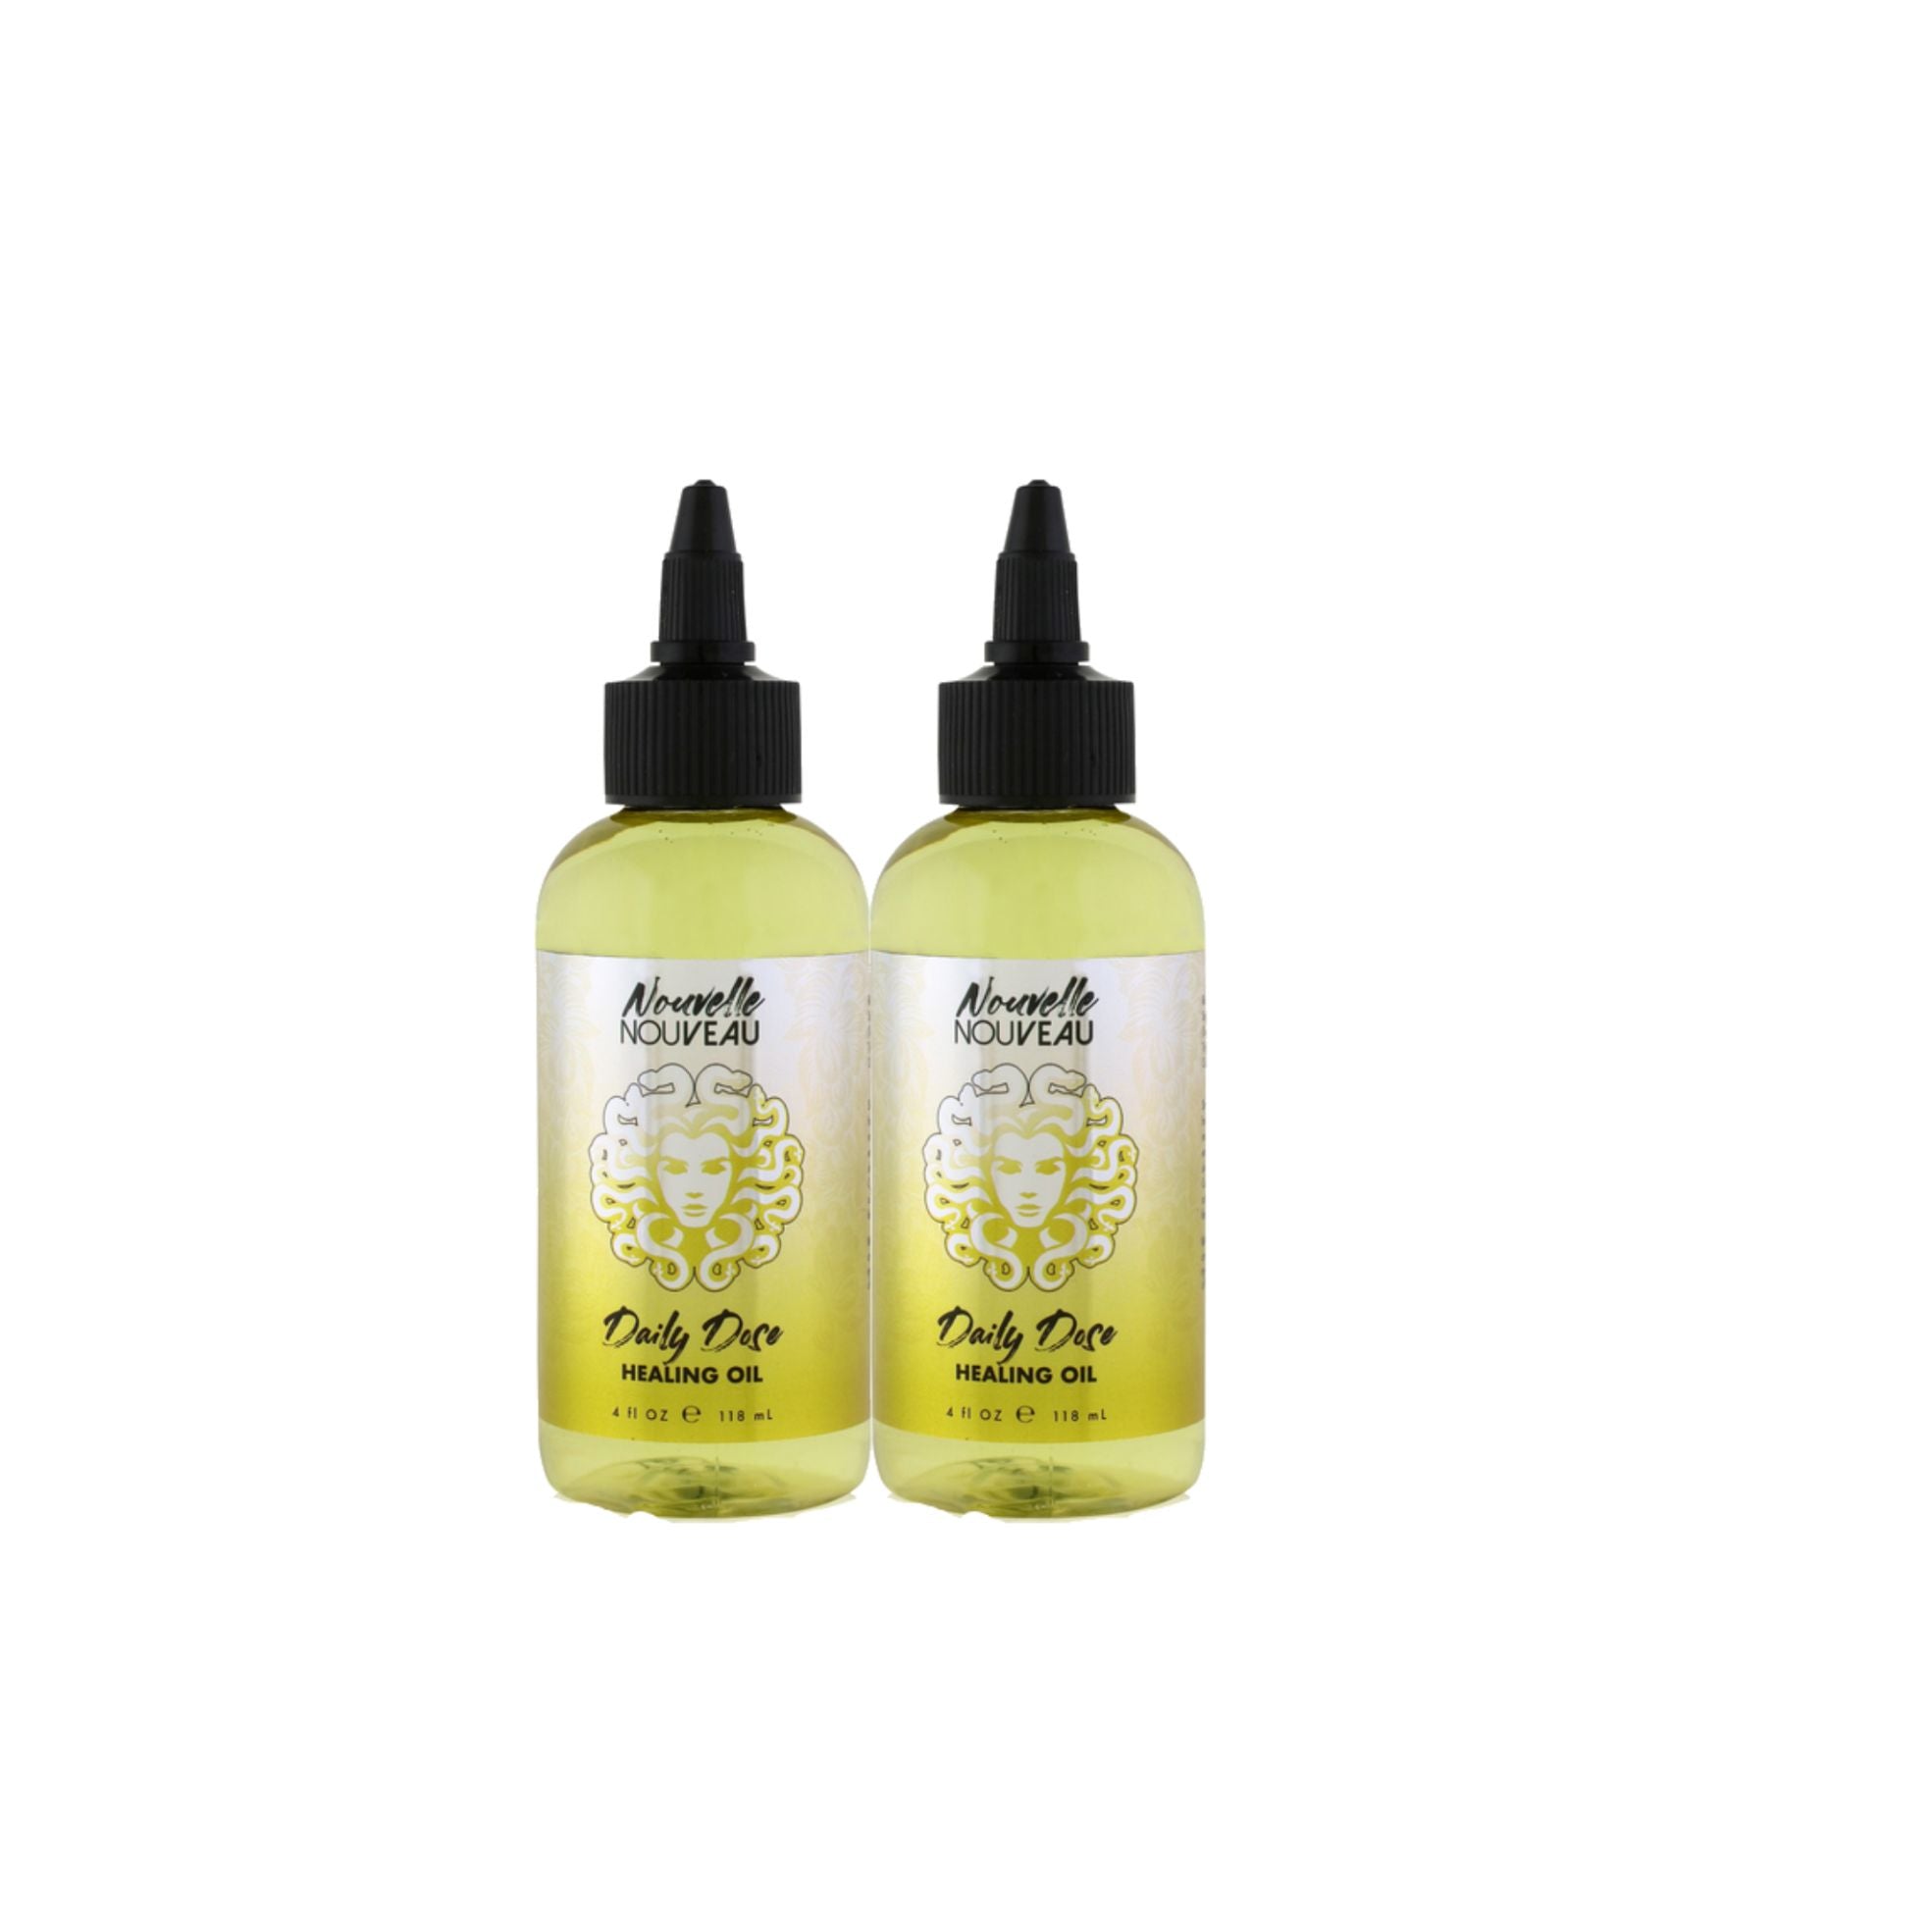 (2pc) Daily Dose "Use Everywhere" Healing Oil Bundle